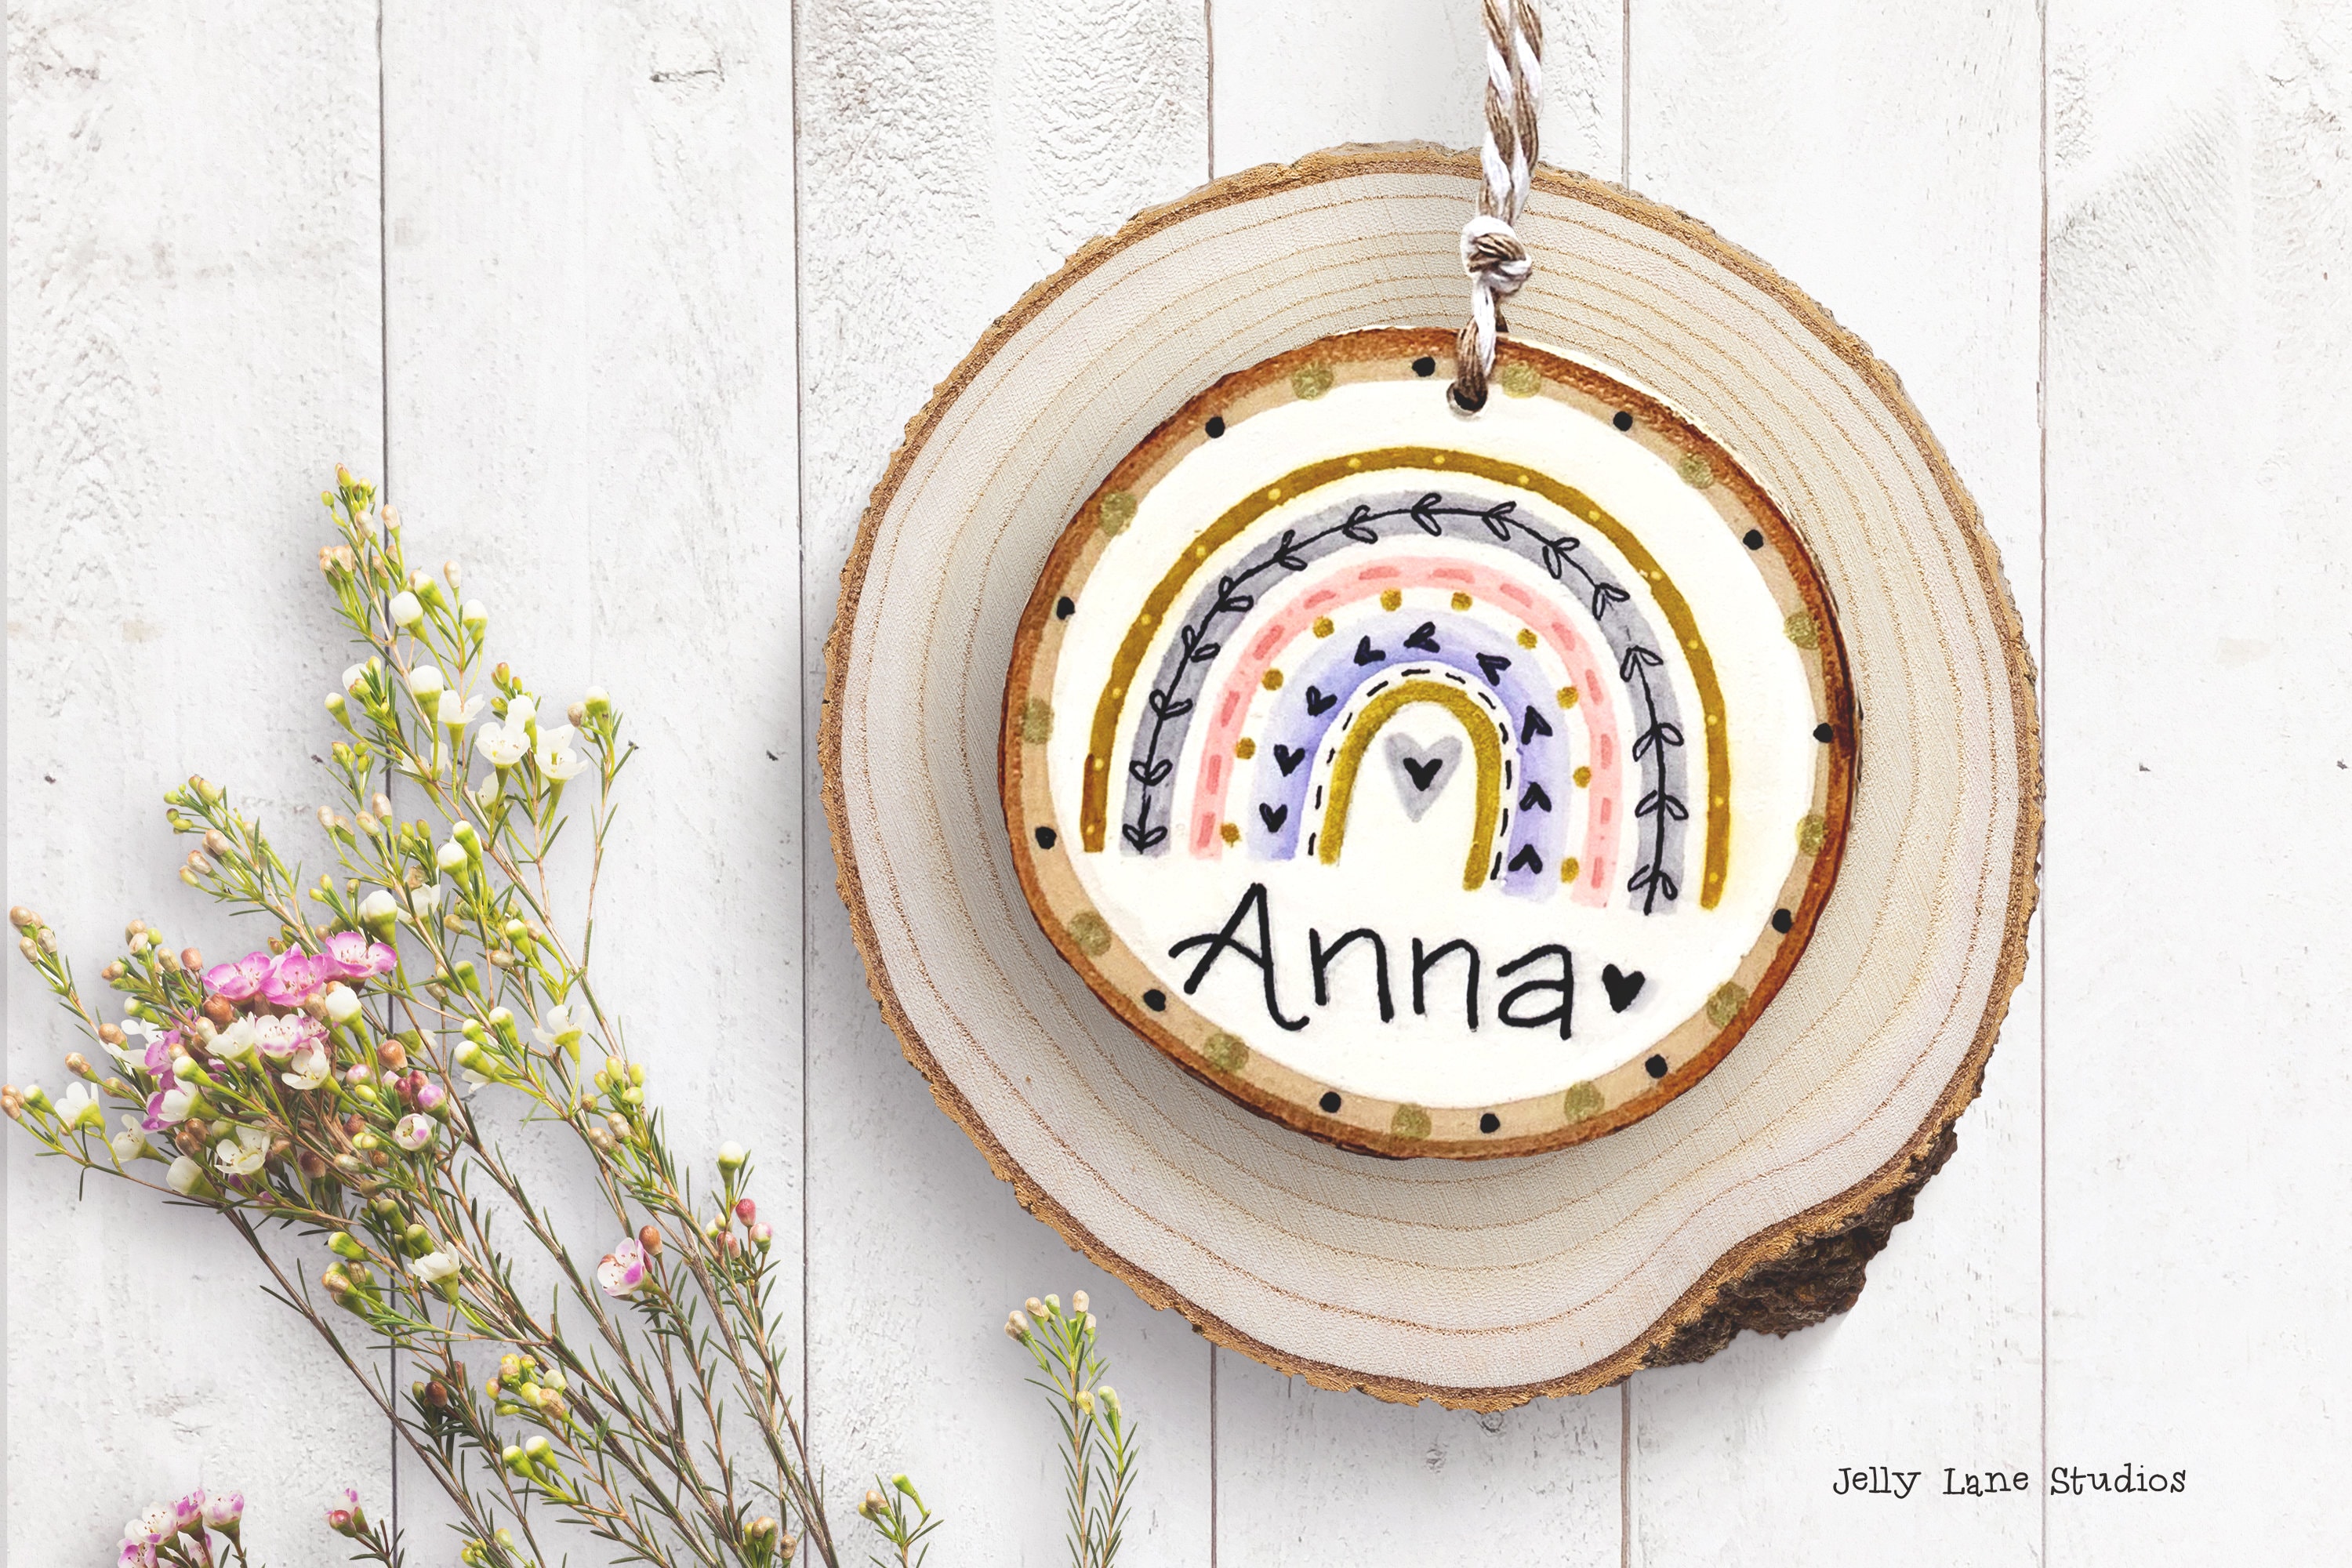 Boho Rainbow Ornament Personalized Wood Slice Ornament Rainbow Magnet Handpainted Rustic Christmas Ornament Ornament for Child